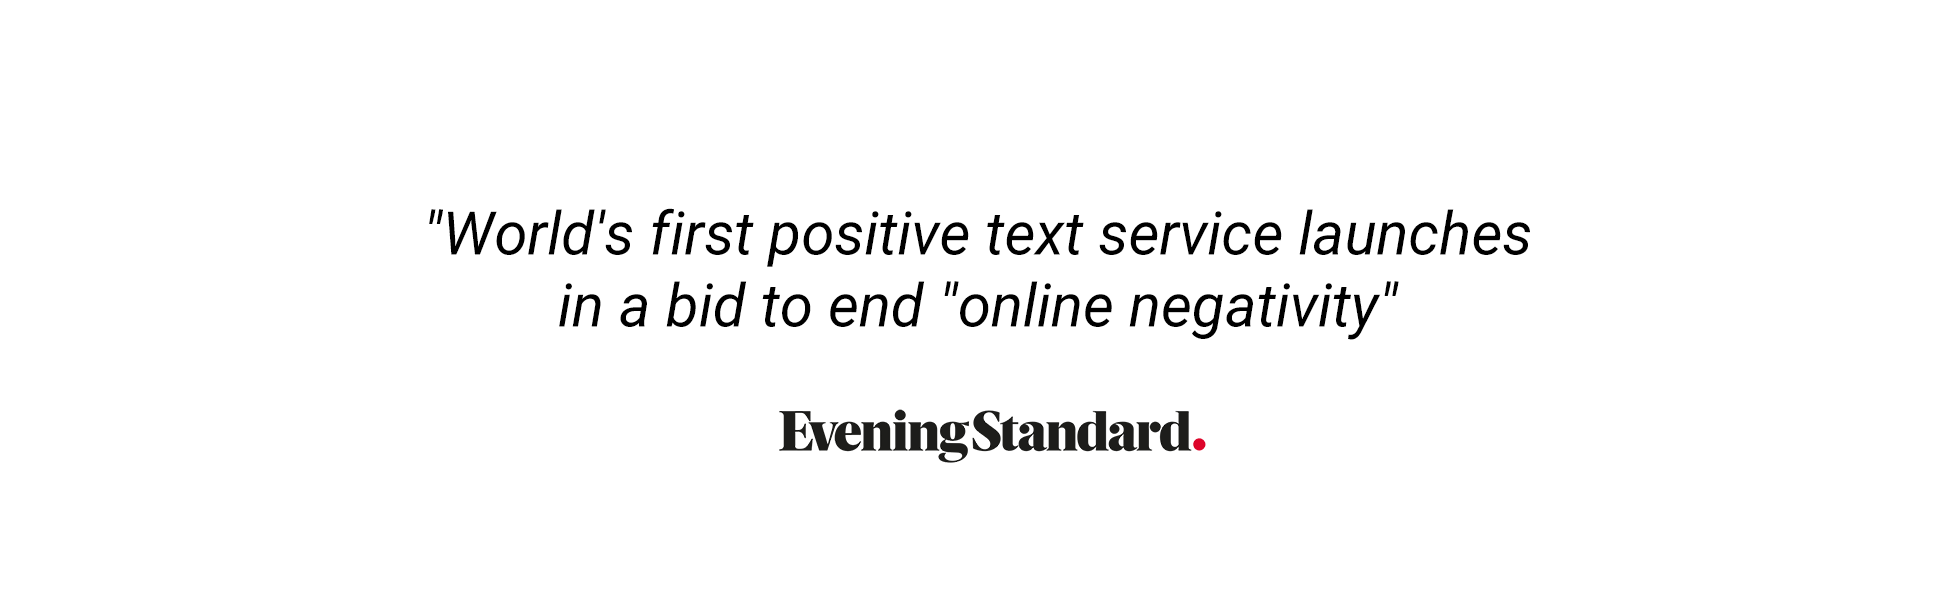 Text for Humanity - Evening Standard 